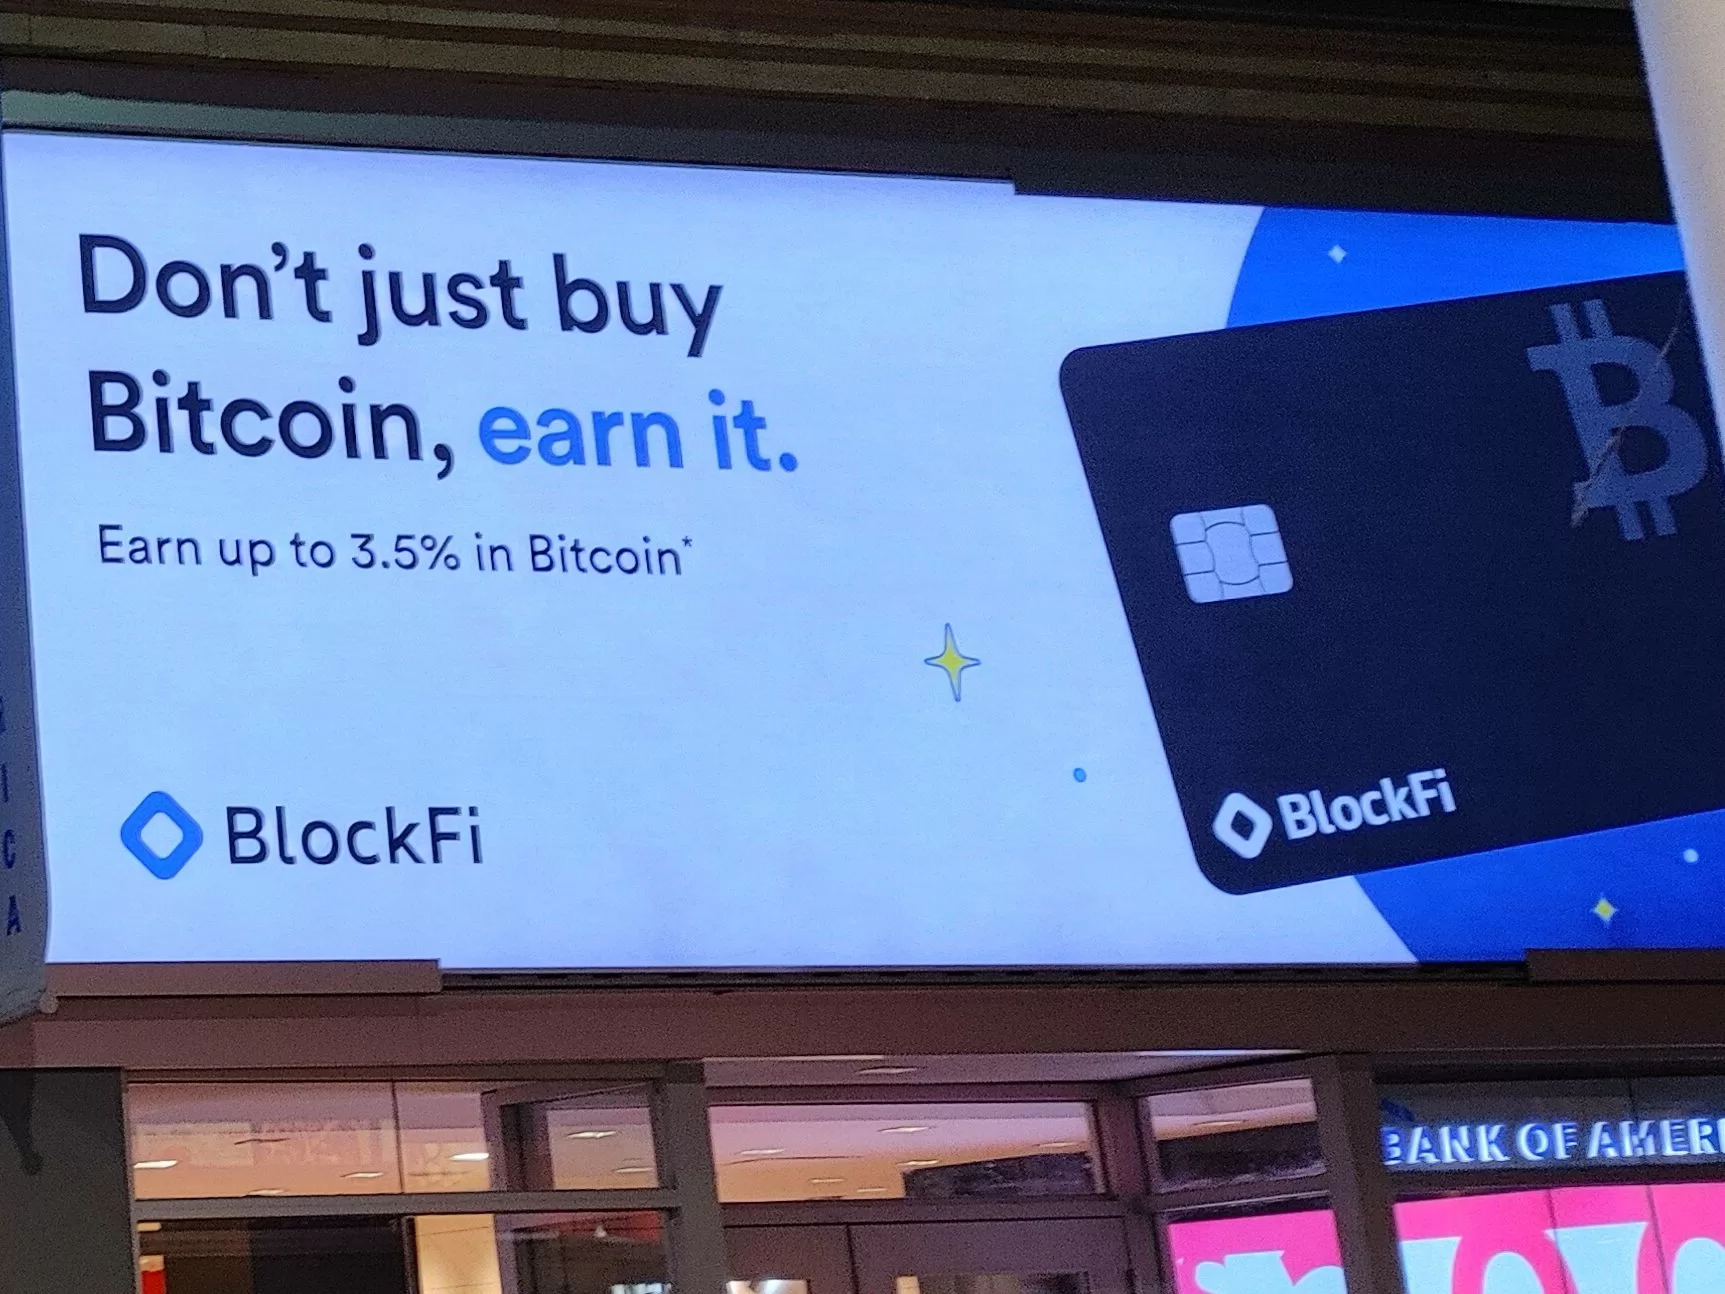 BlockFi files for bankruptcy